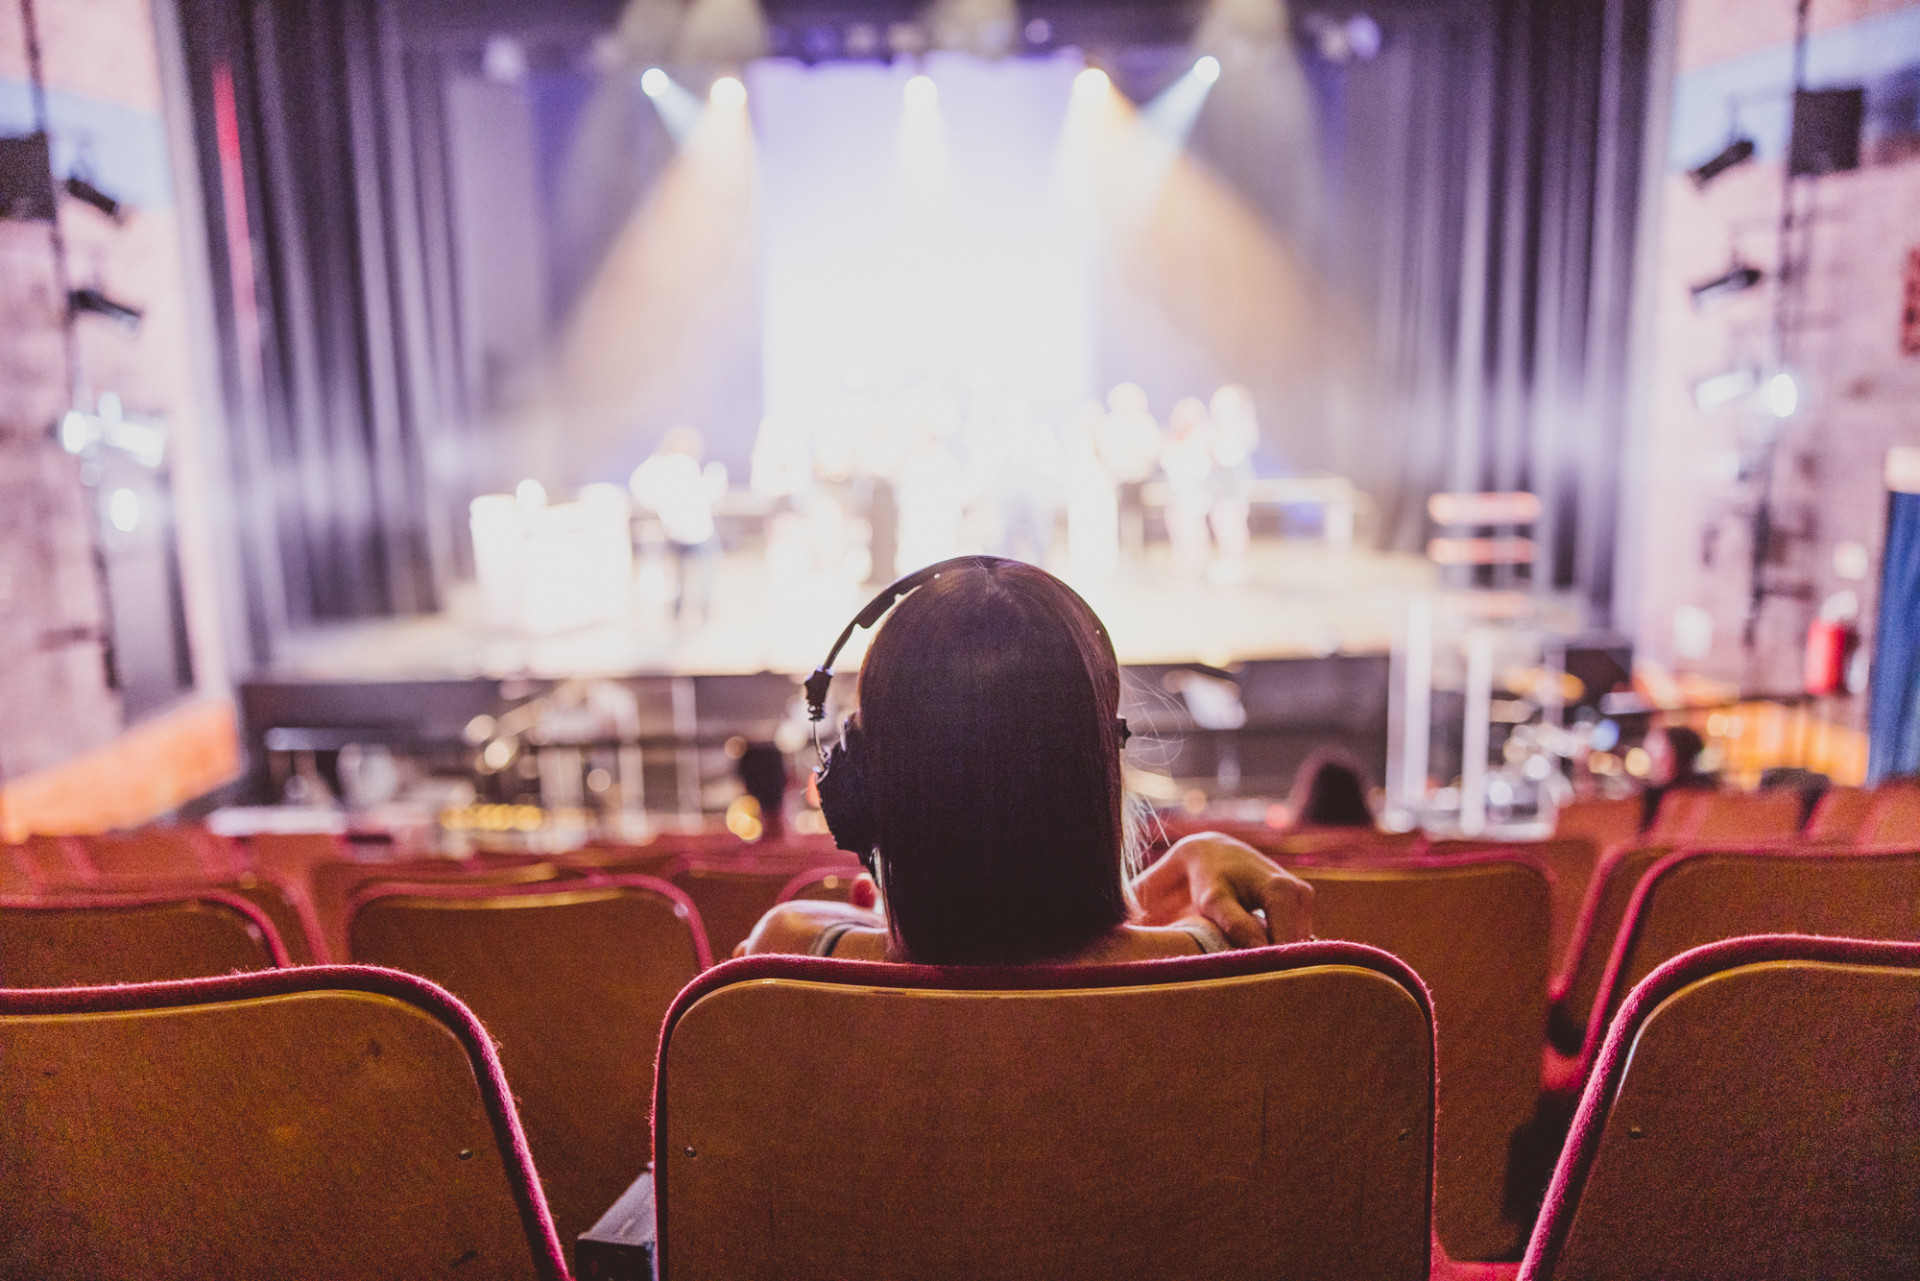 Female student wearing headphones watching performance on stage